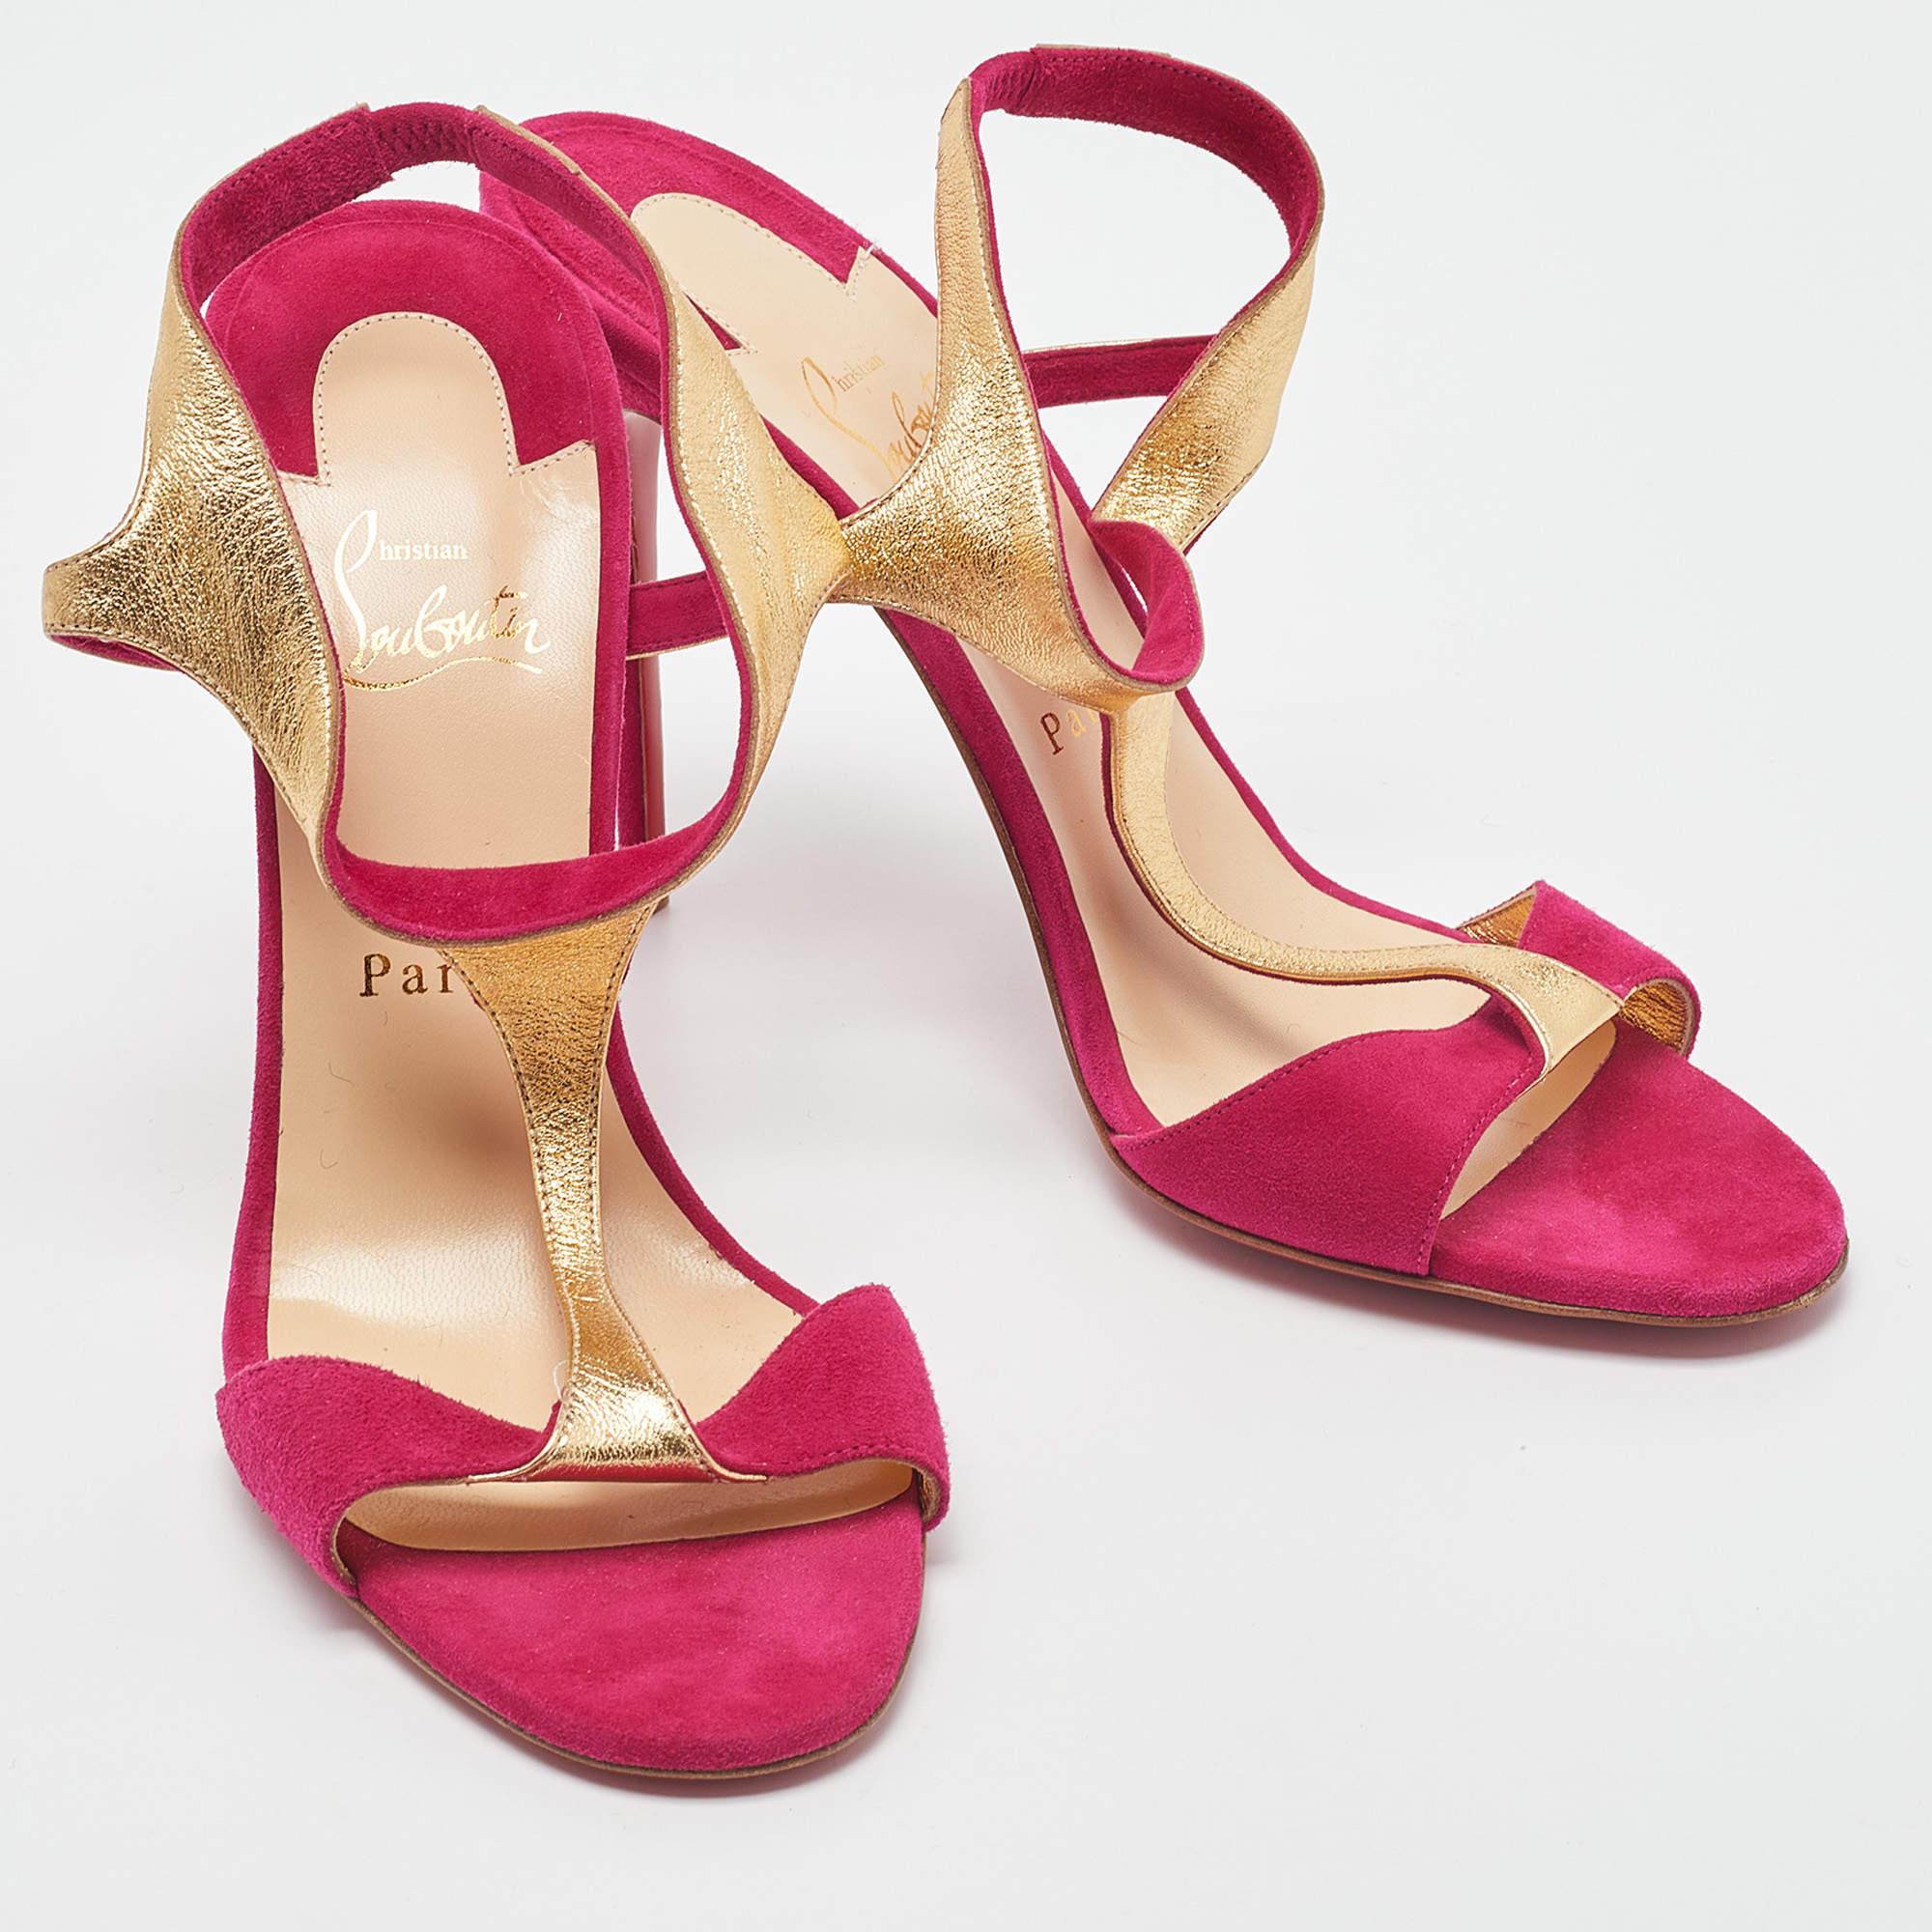 Christian Louboutin Pink/Gold Suede and Leather Morphetina Sandals Size 40.5 For Sale 1